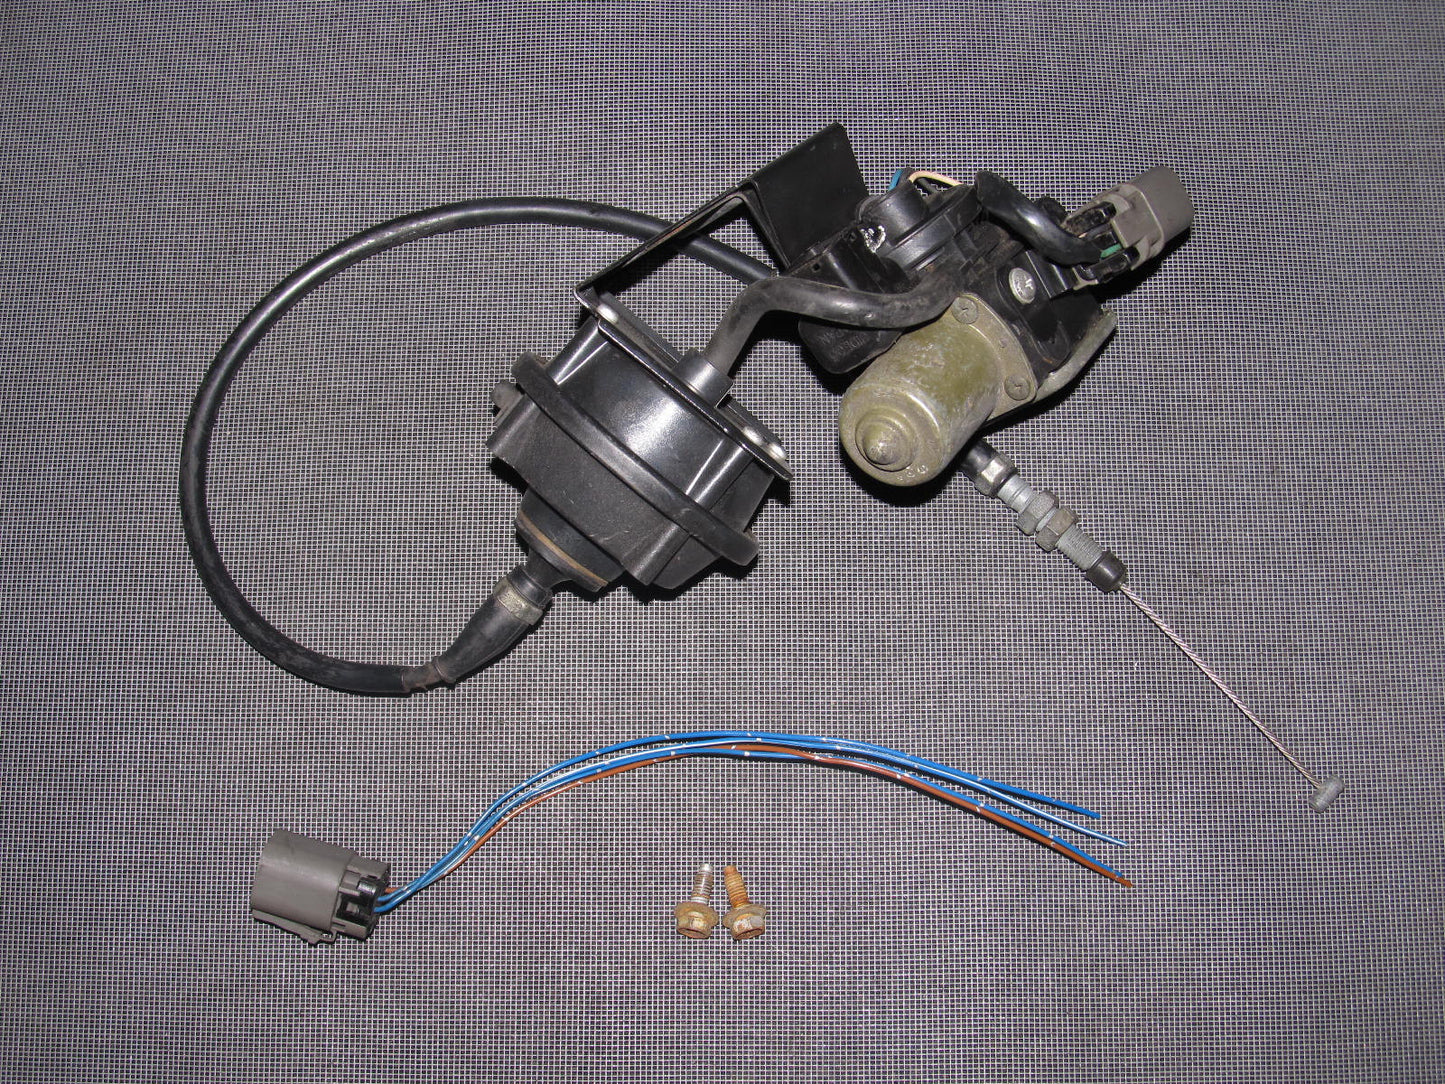 90-96 Nissan 300zx OEM Cruise Control Motor Actuator & Cable